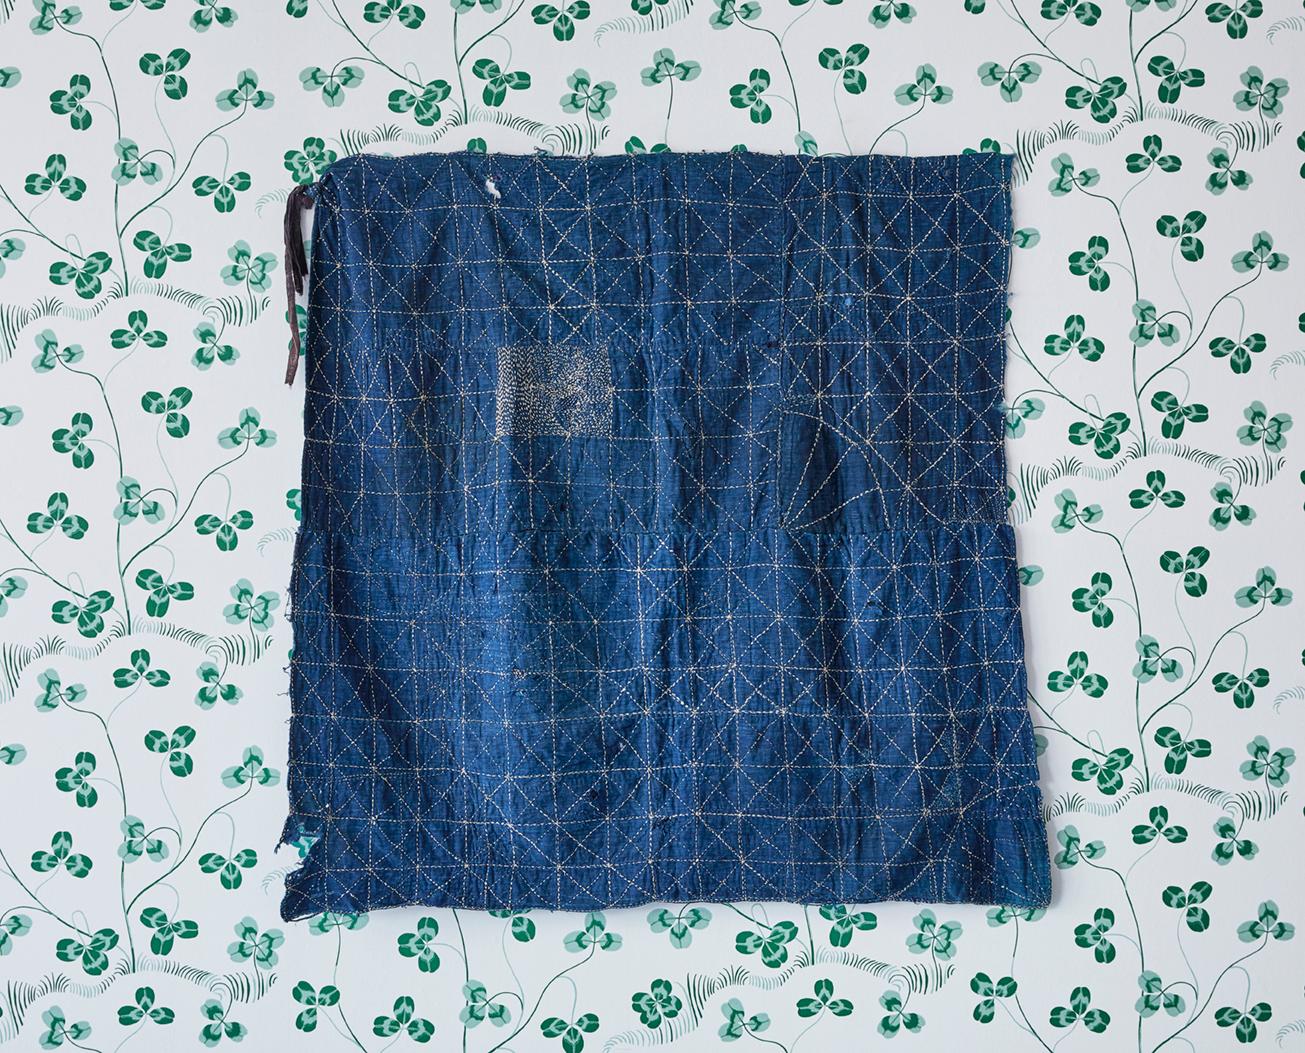 Japan, vintage

Delicate handcrafted antique patched 'Boro' textile with detailed stitching.
Likely used as a Furoshiki or duvet cover. 

'Boro' are a class of Japanese textiles. During the Edo period, 'Boro' came to predominately signify